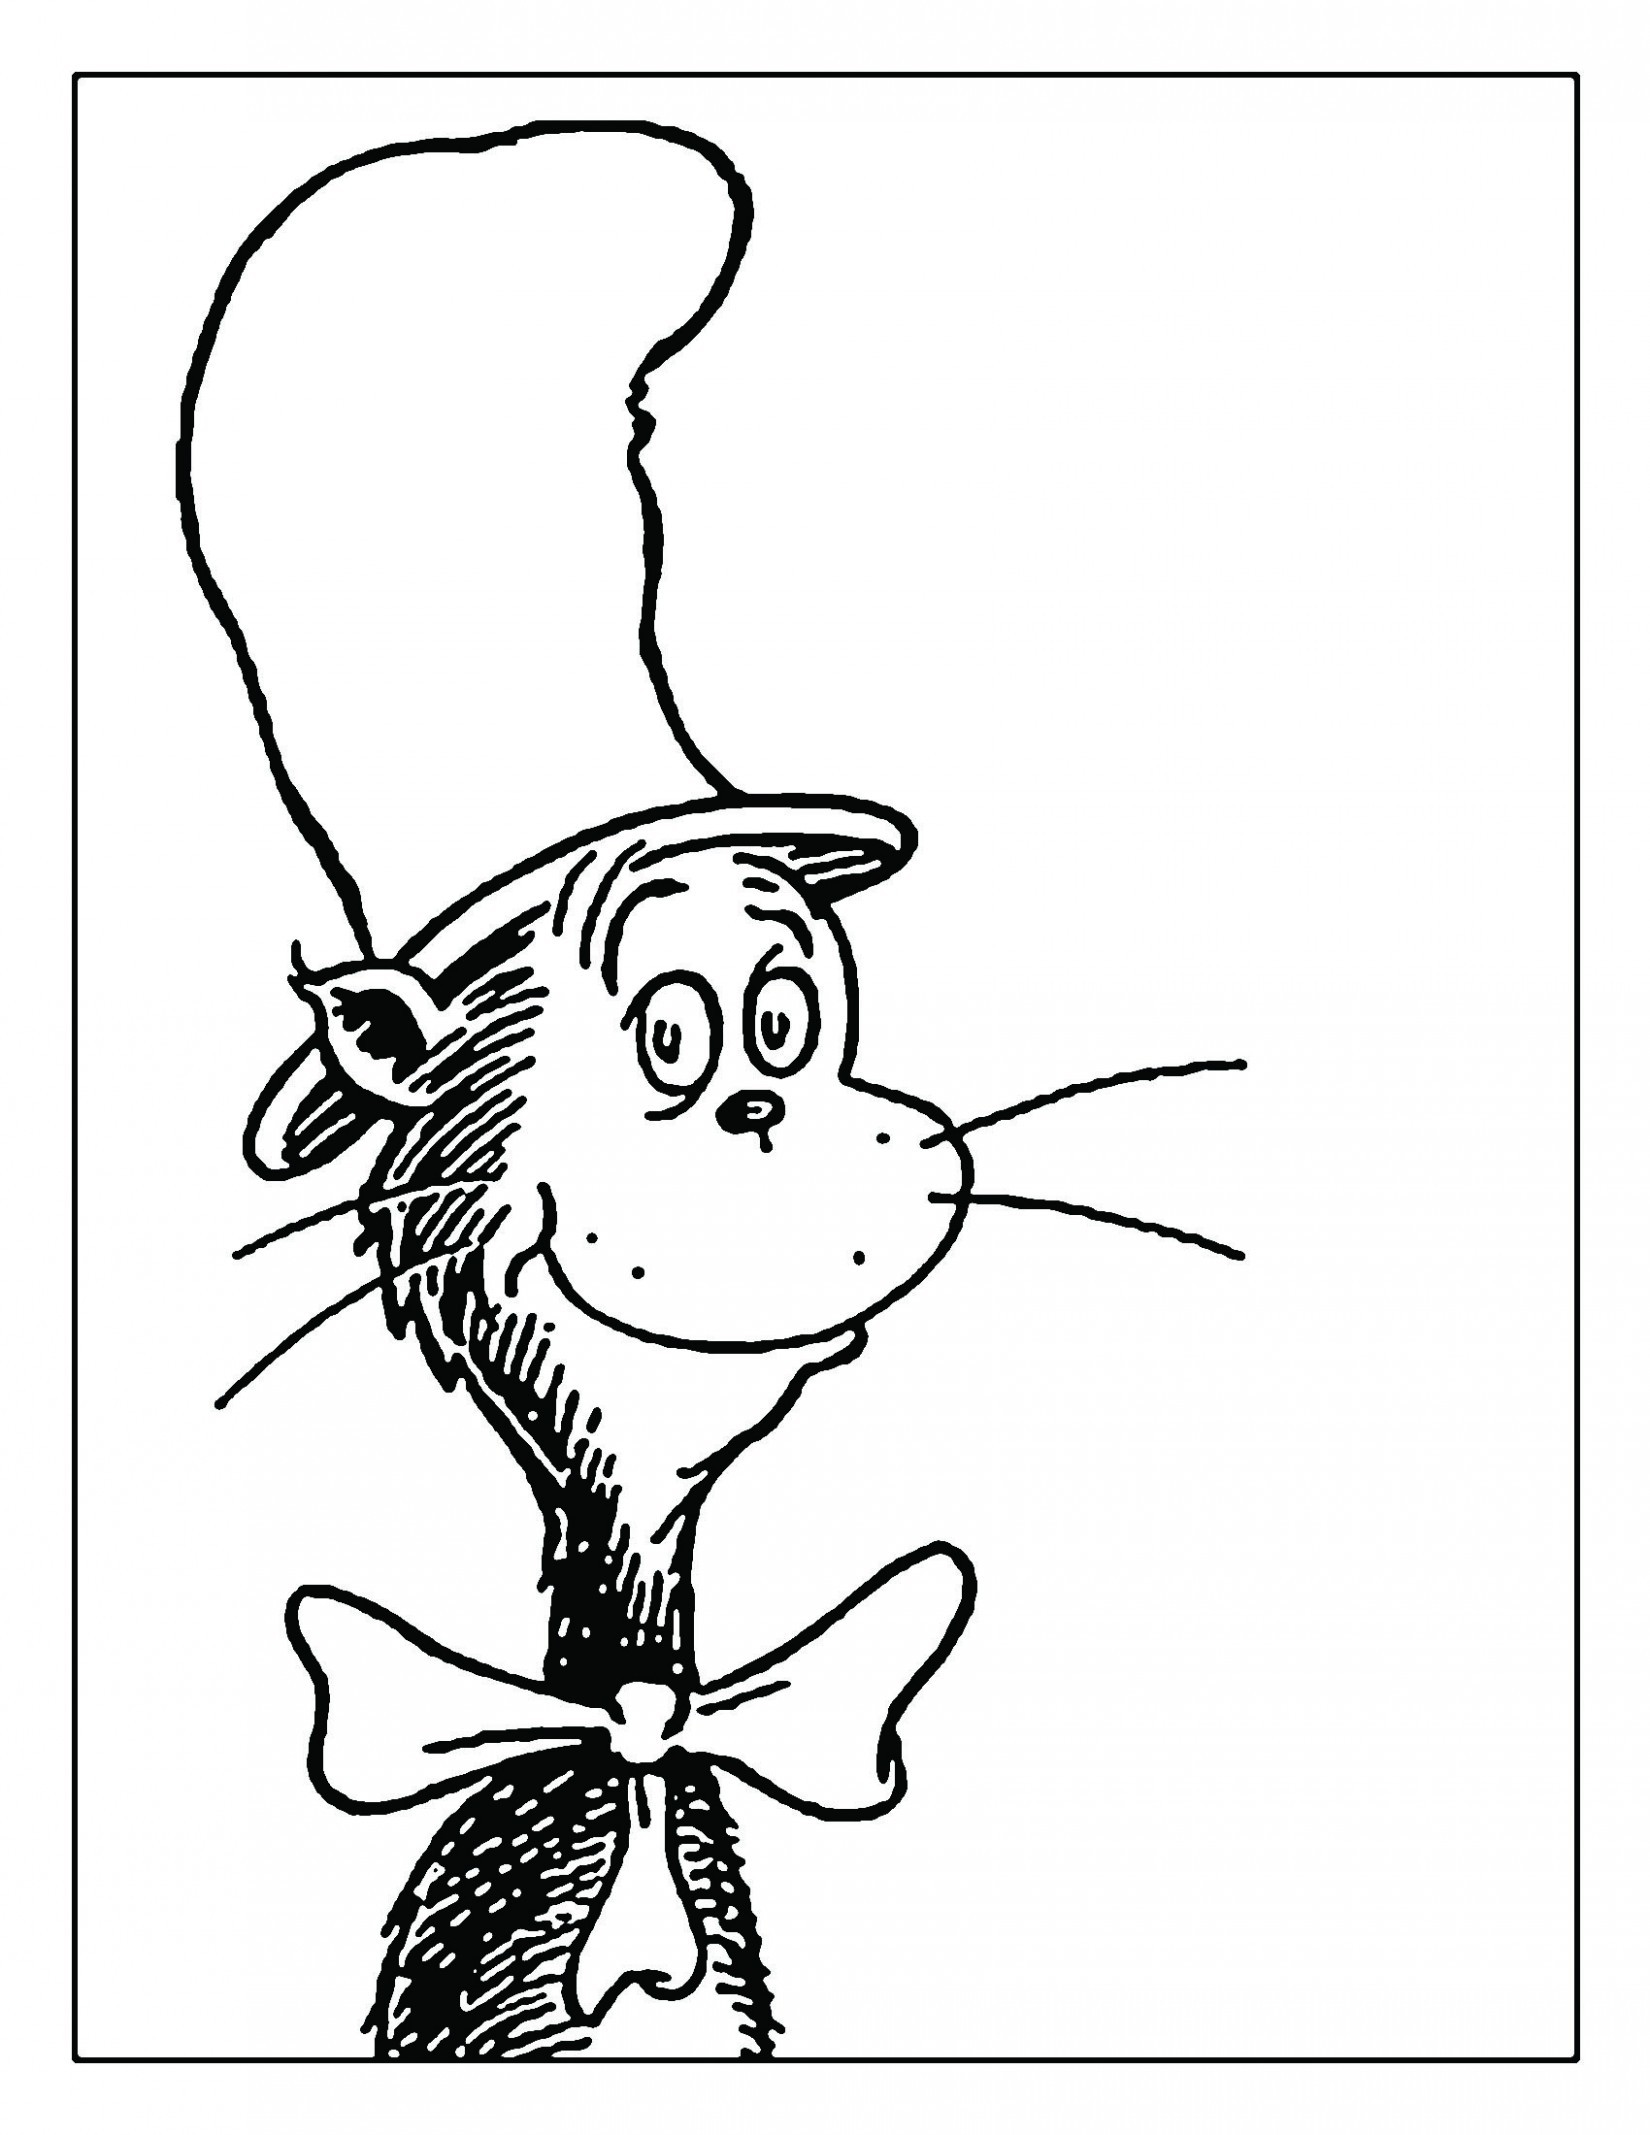 dr-seuss-images-free-free-download-on-clipartmag